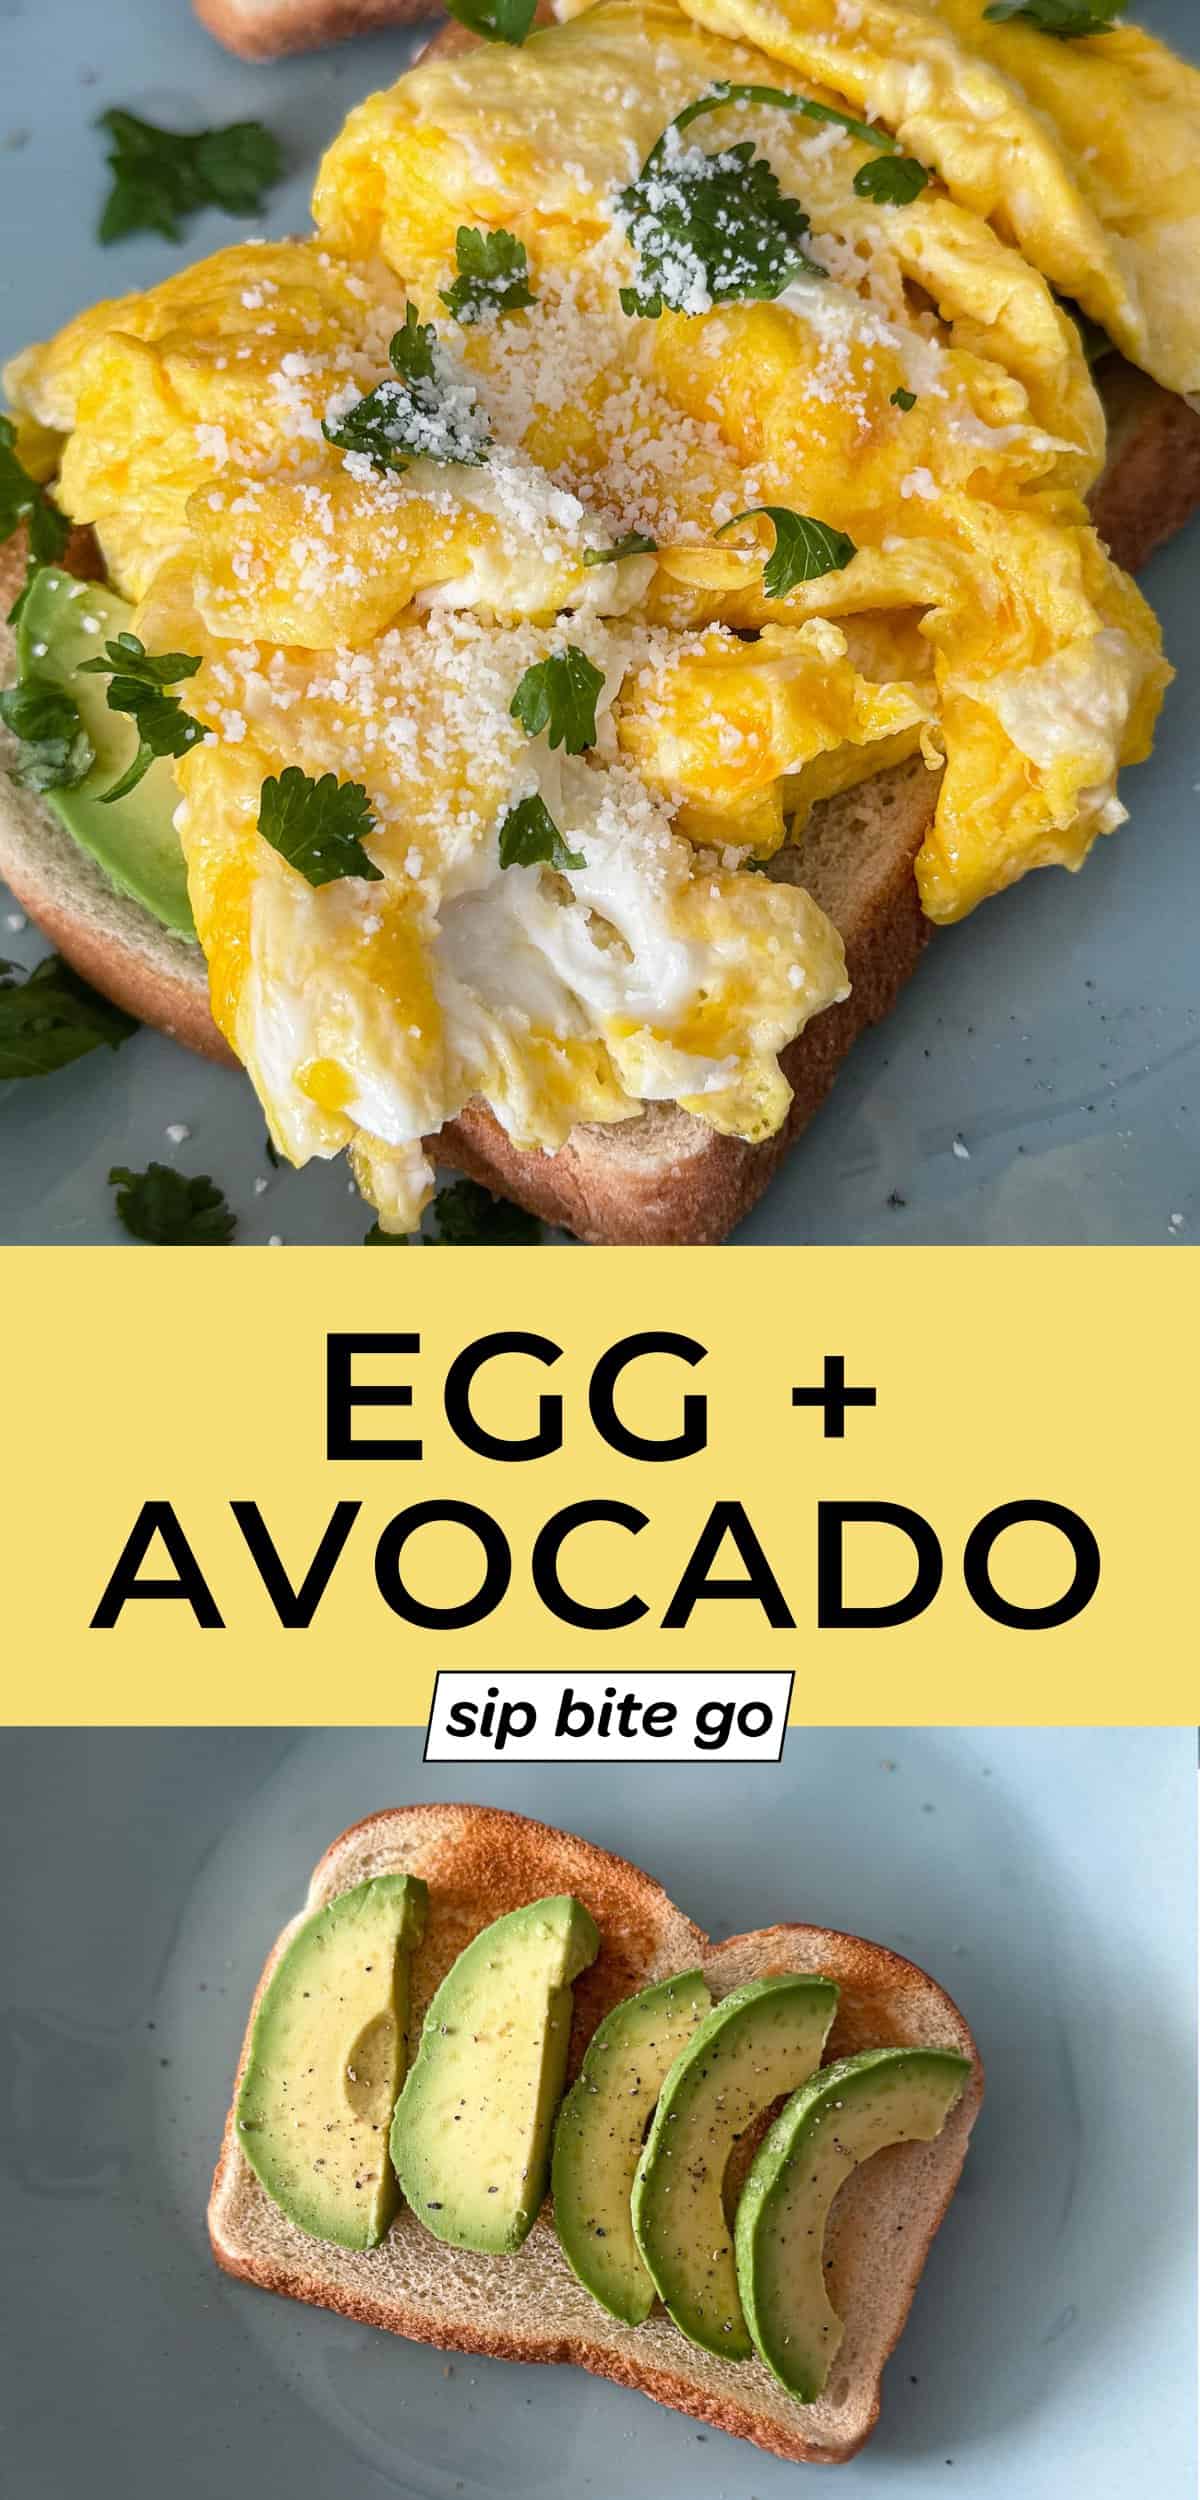 Breakfast Sandwich Recipe with Egg and Avocado on Sourdough Toast with text overlay